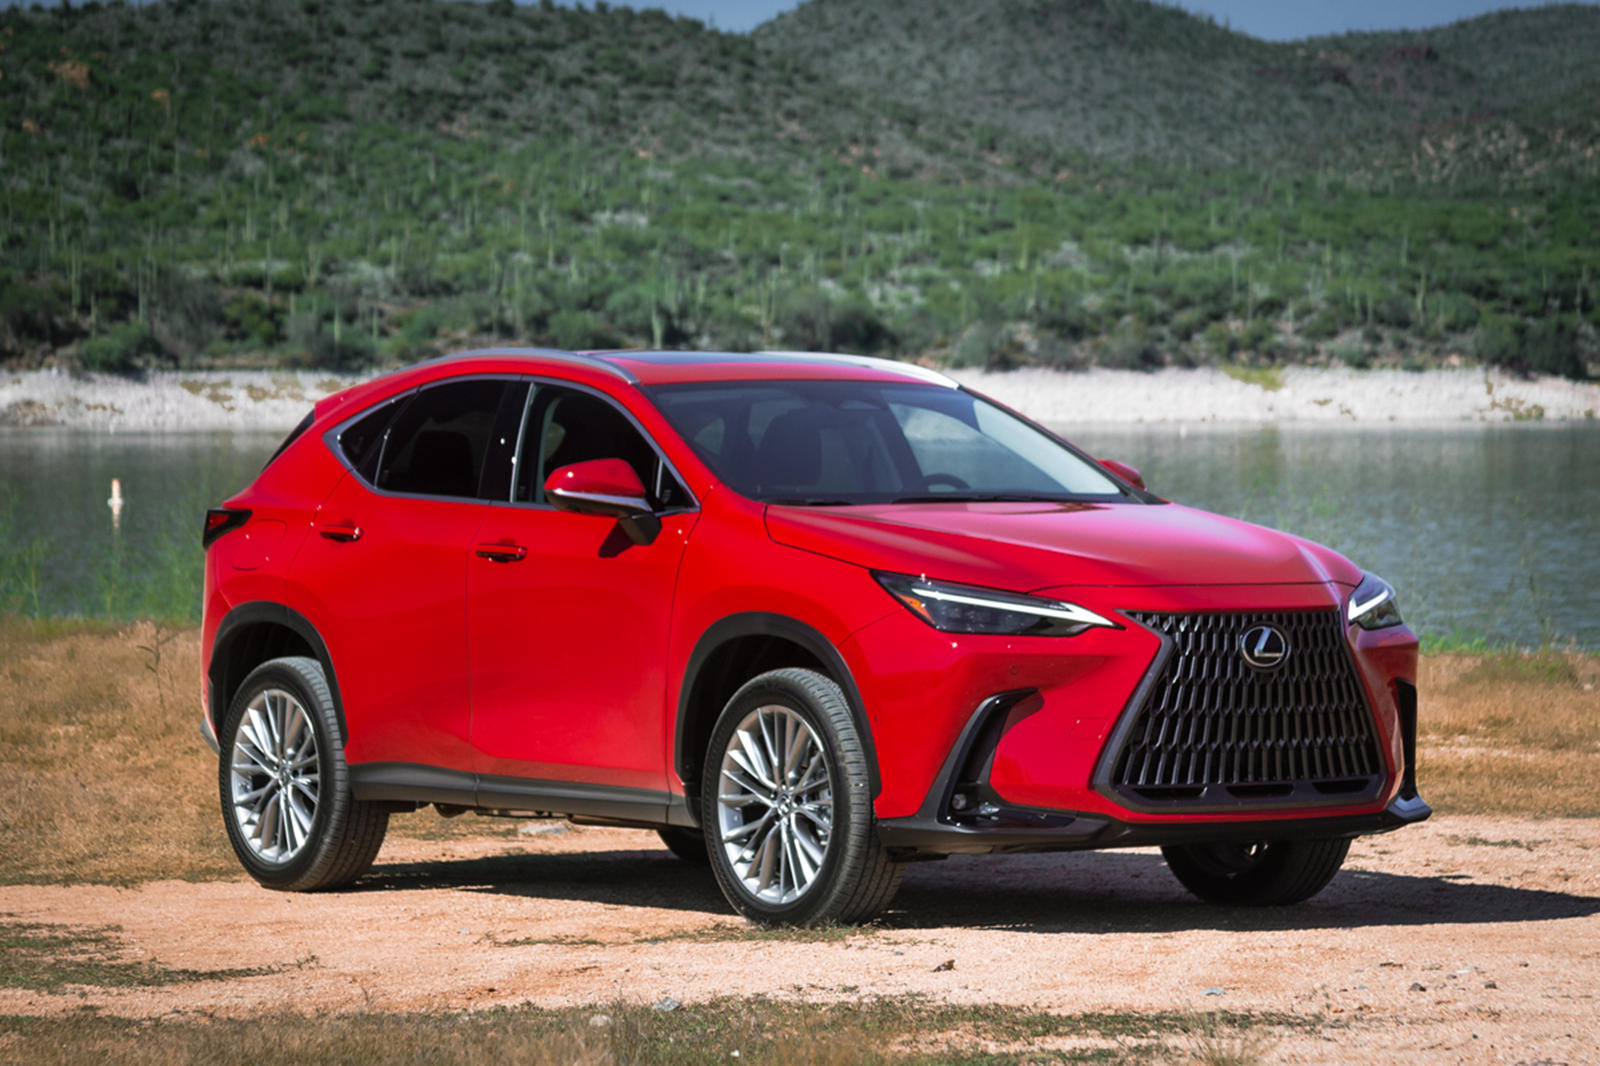 Used Lexus NX For Sale in Doylestown, PA CarBuzz